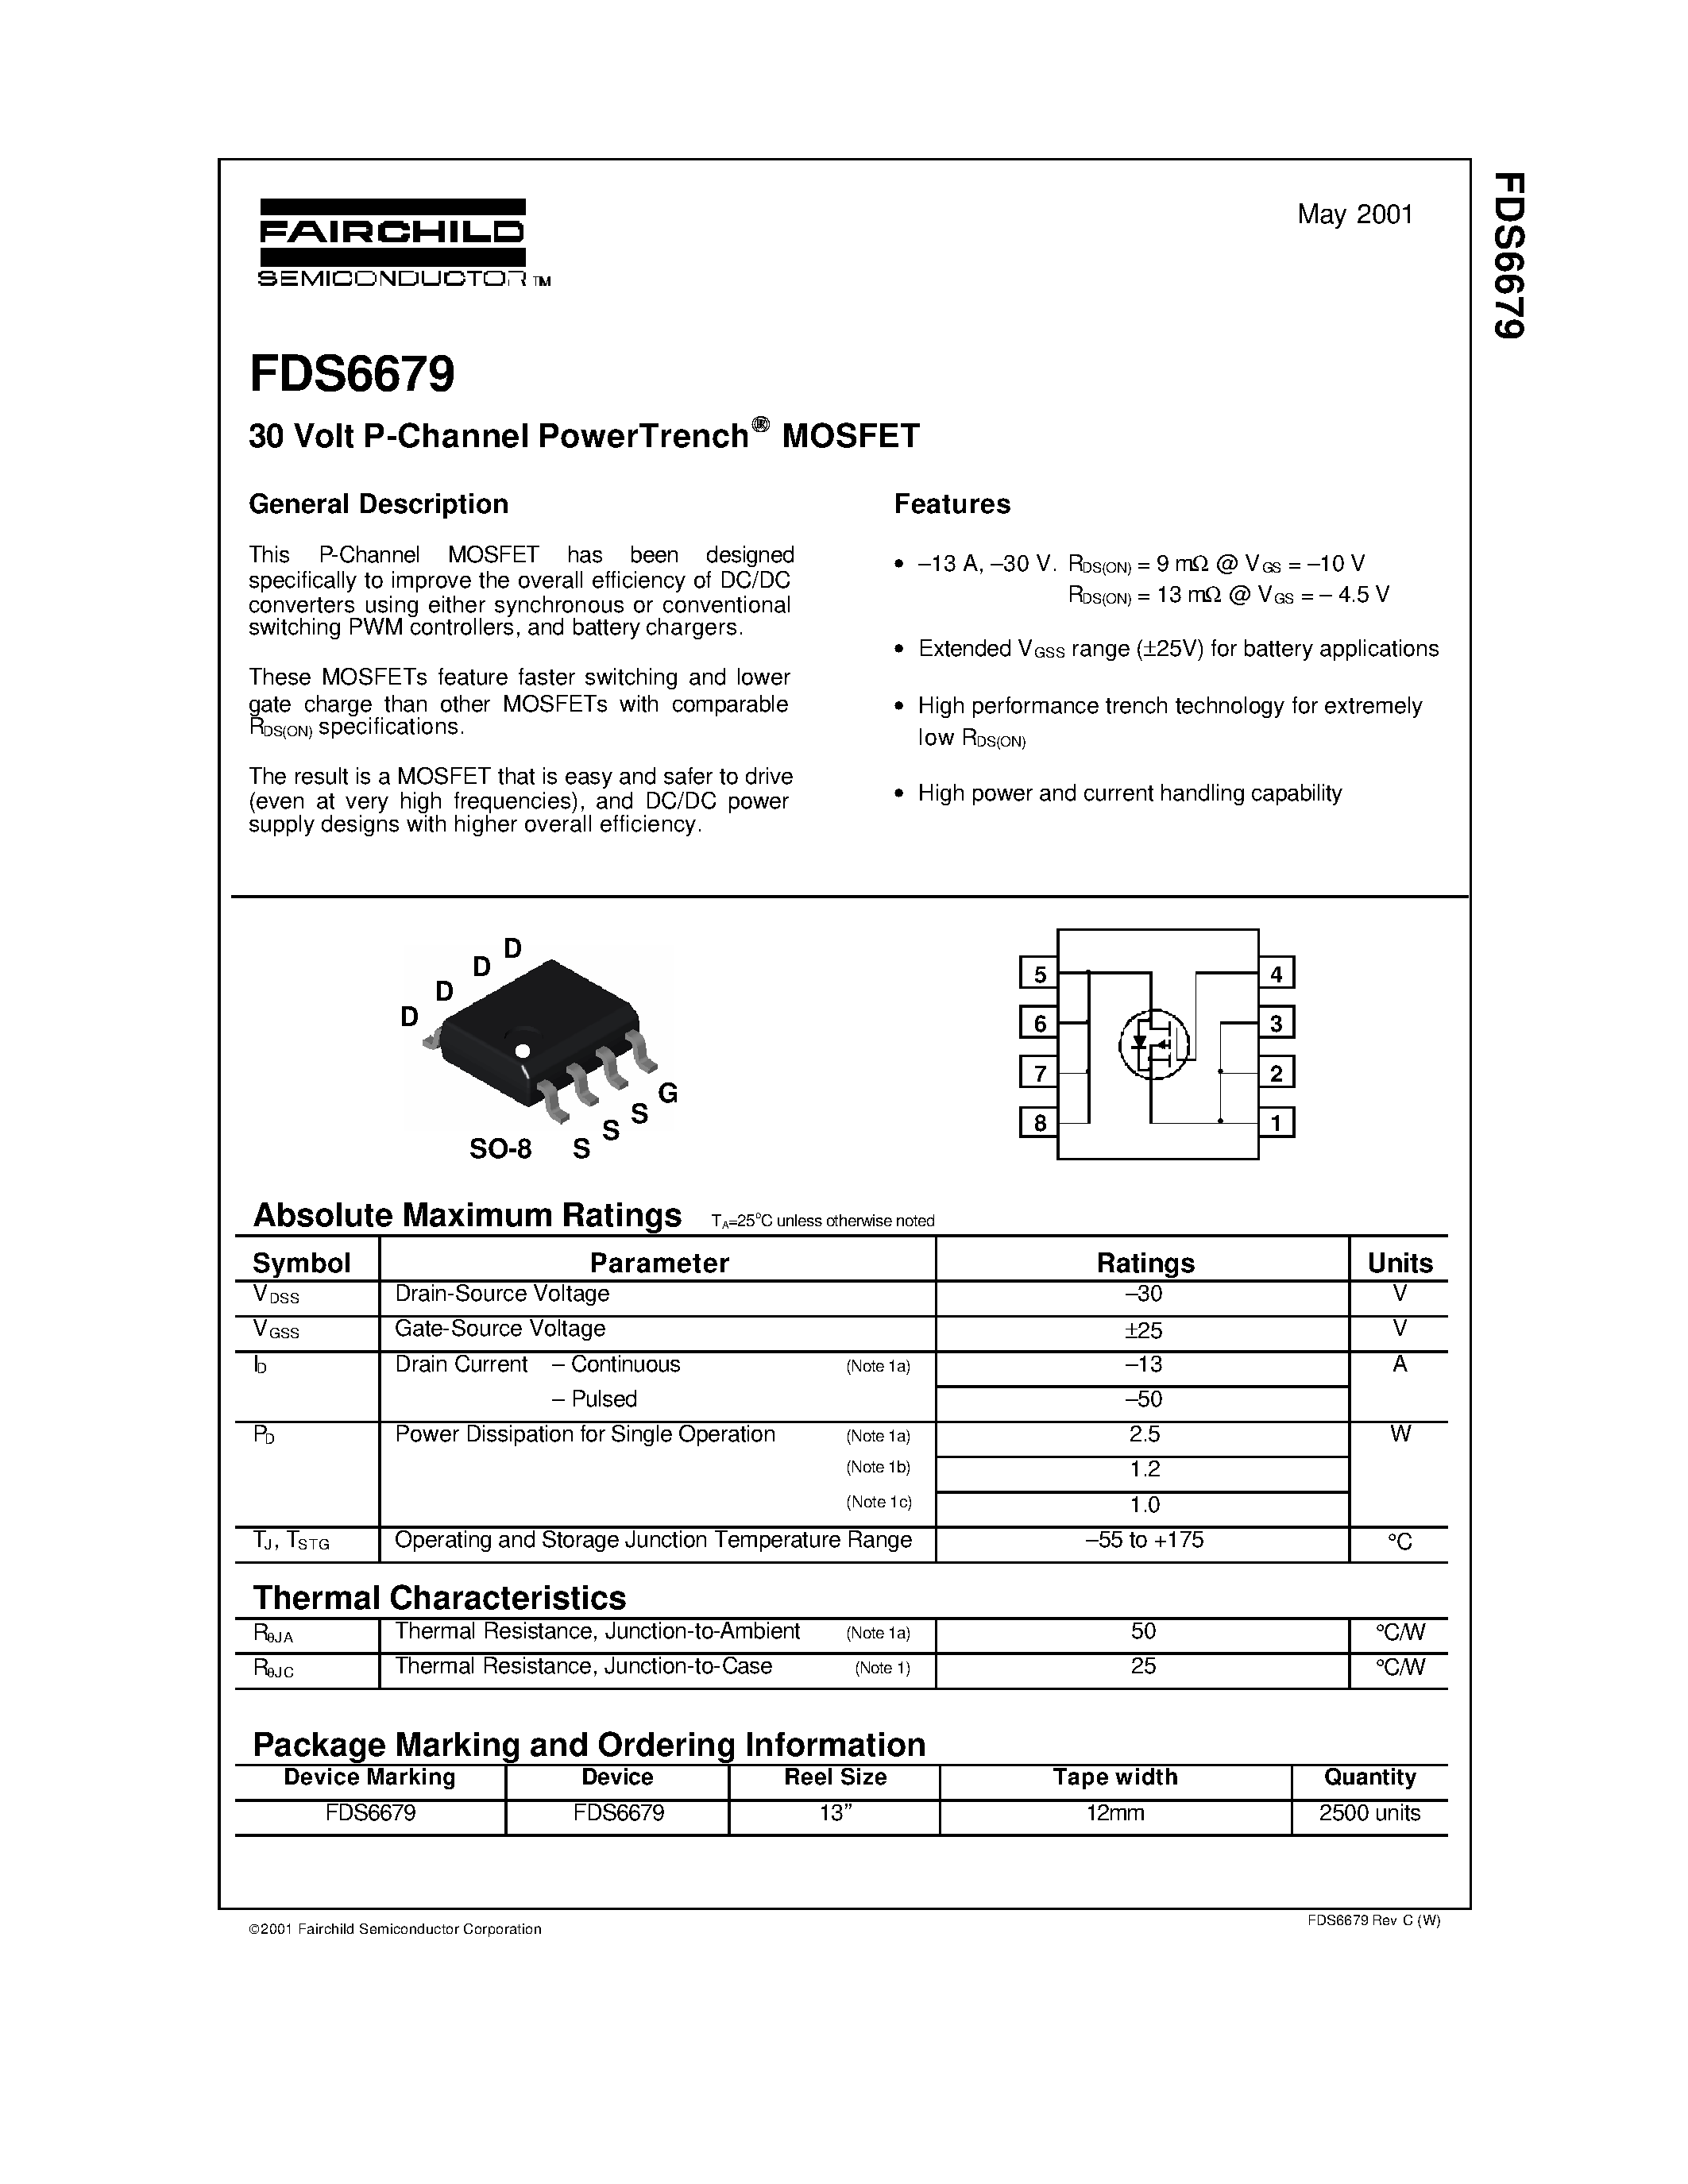 Даташит FDS6679 - 30 Volt P-Channel PowerTrench MOSFET страница 1